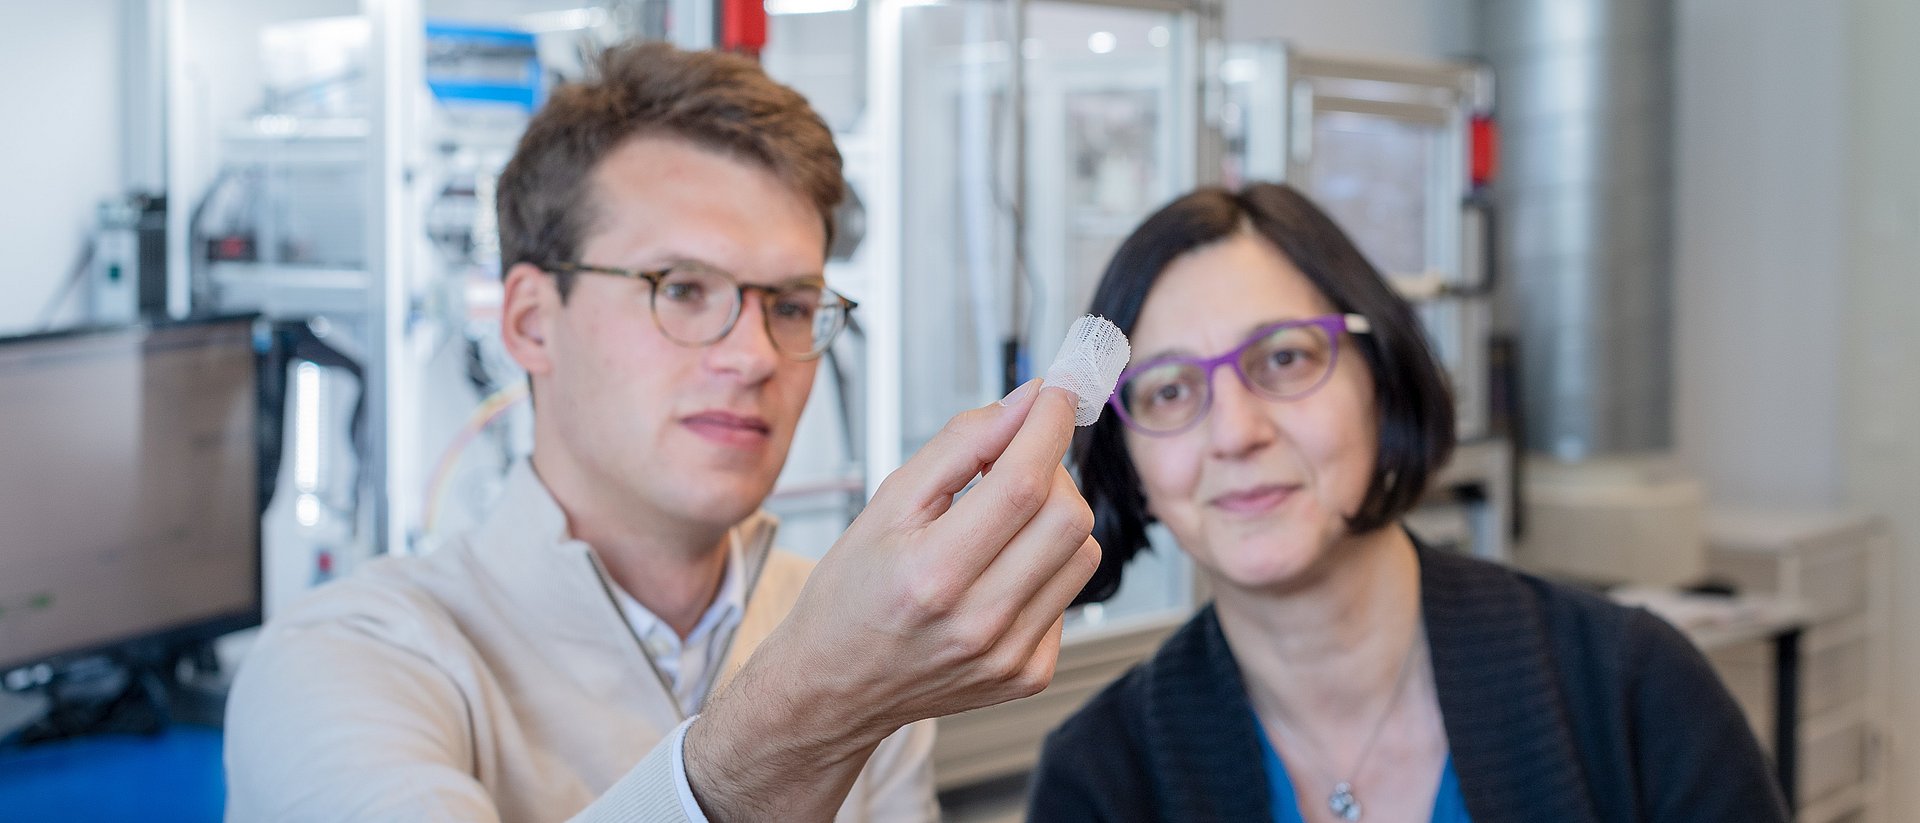 Petra Mela, Professor of Medical Materials and Implants at the Technical University of Munich (TUM) and doctoral candidate Kilian Meuller examine an artificial heart valve produced with the additive manufacturing technology melt electrowriting.